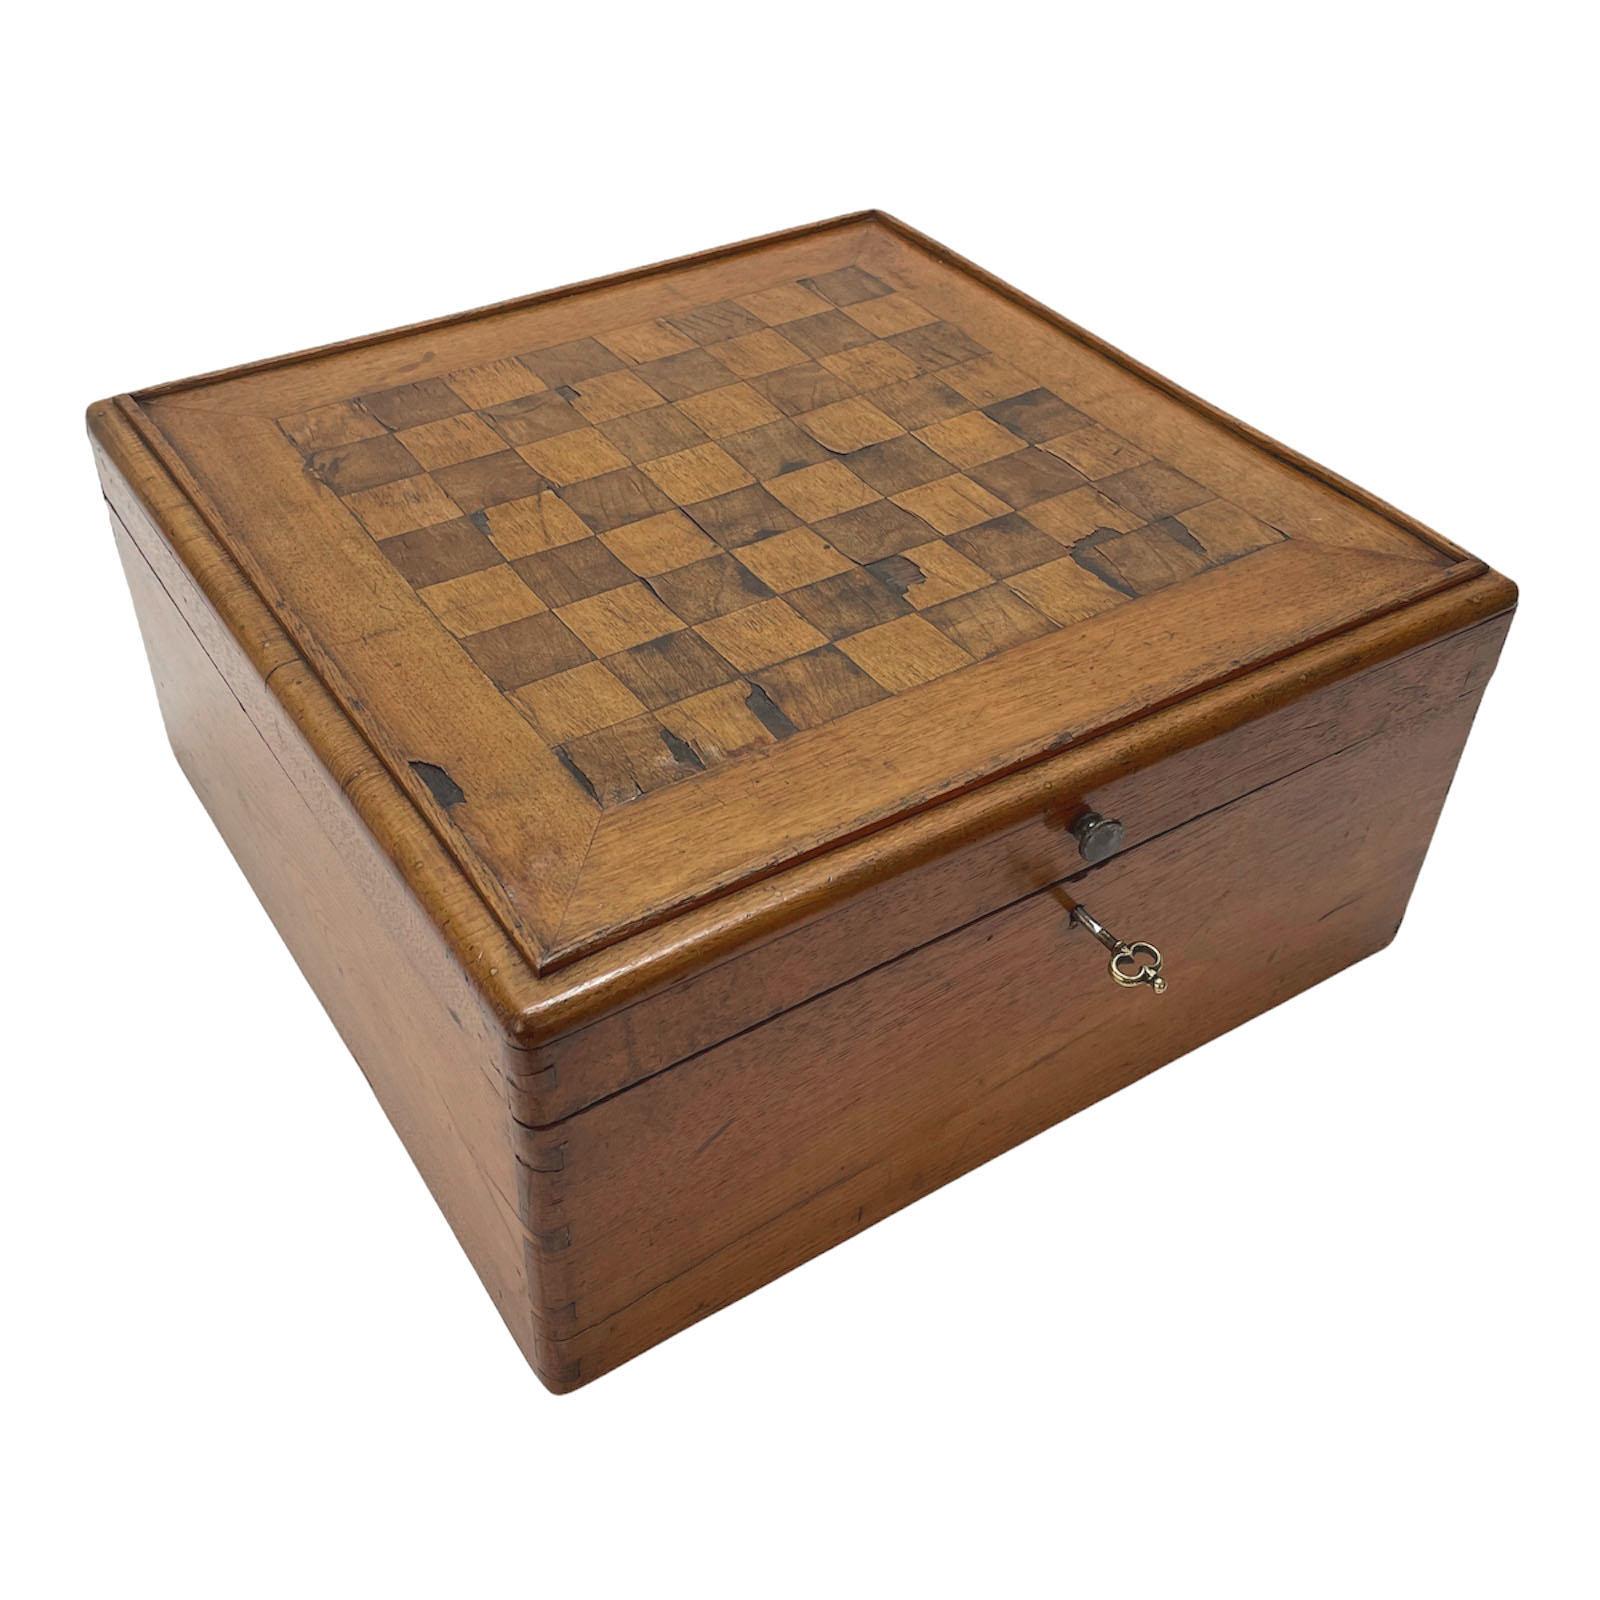 Other Early 20th Century Large Wooden Inlaid Squared Italian Chessboard Box, 1900s For Sale